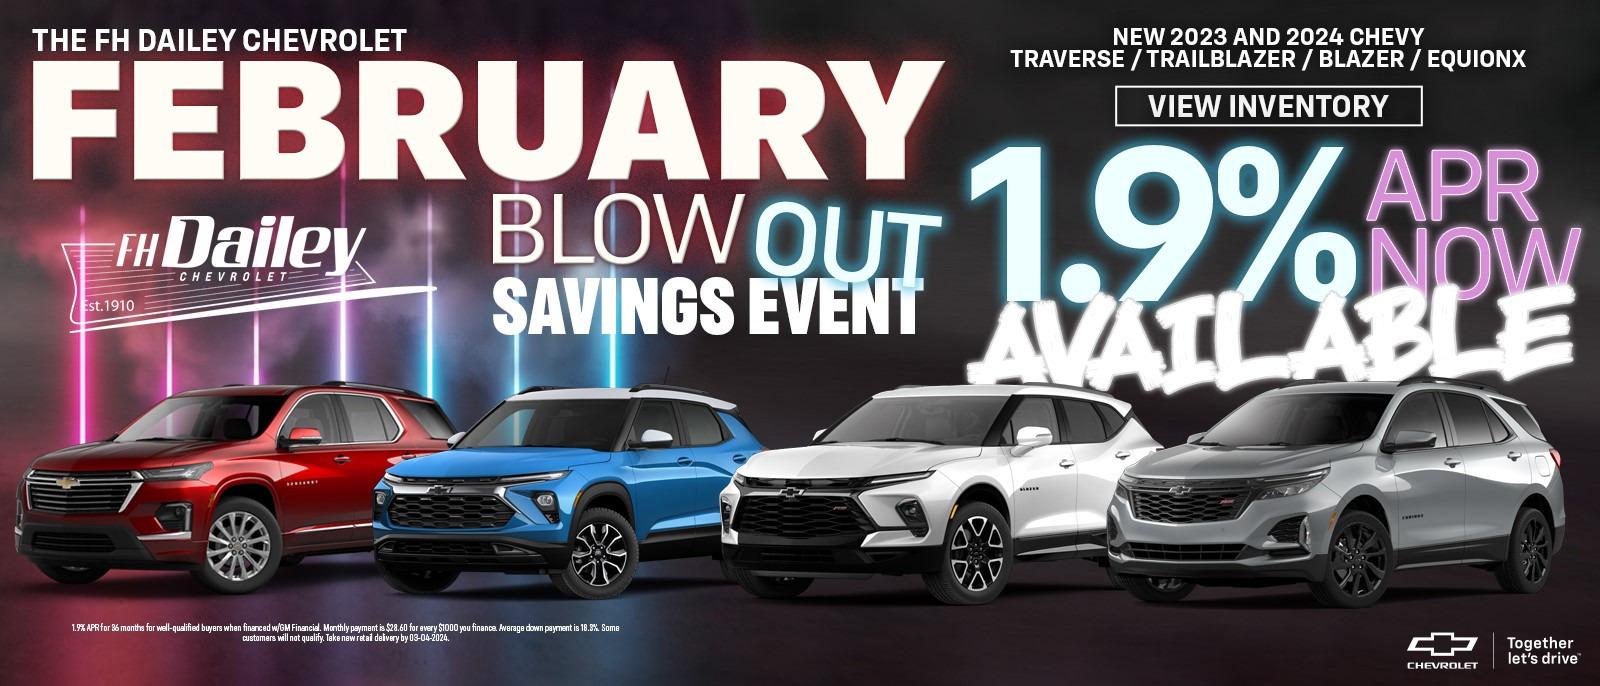 Blow Out Savings event! 1.9% available!